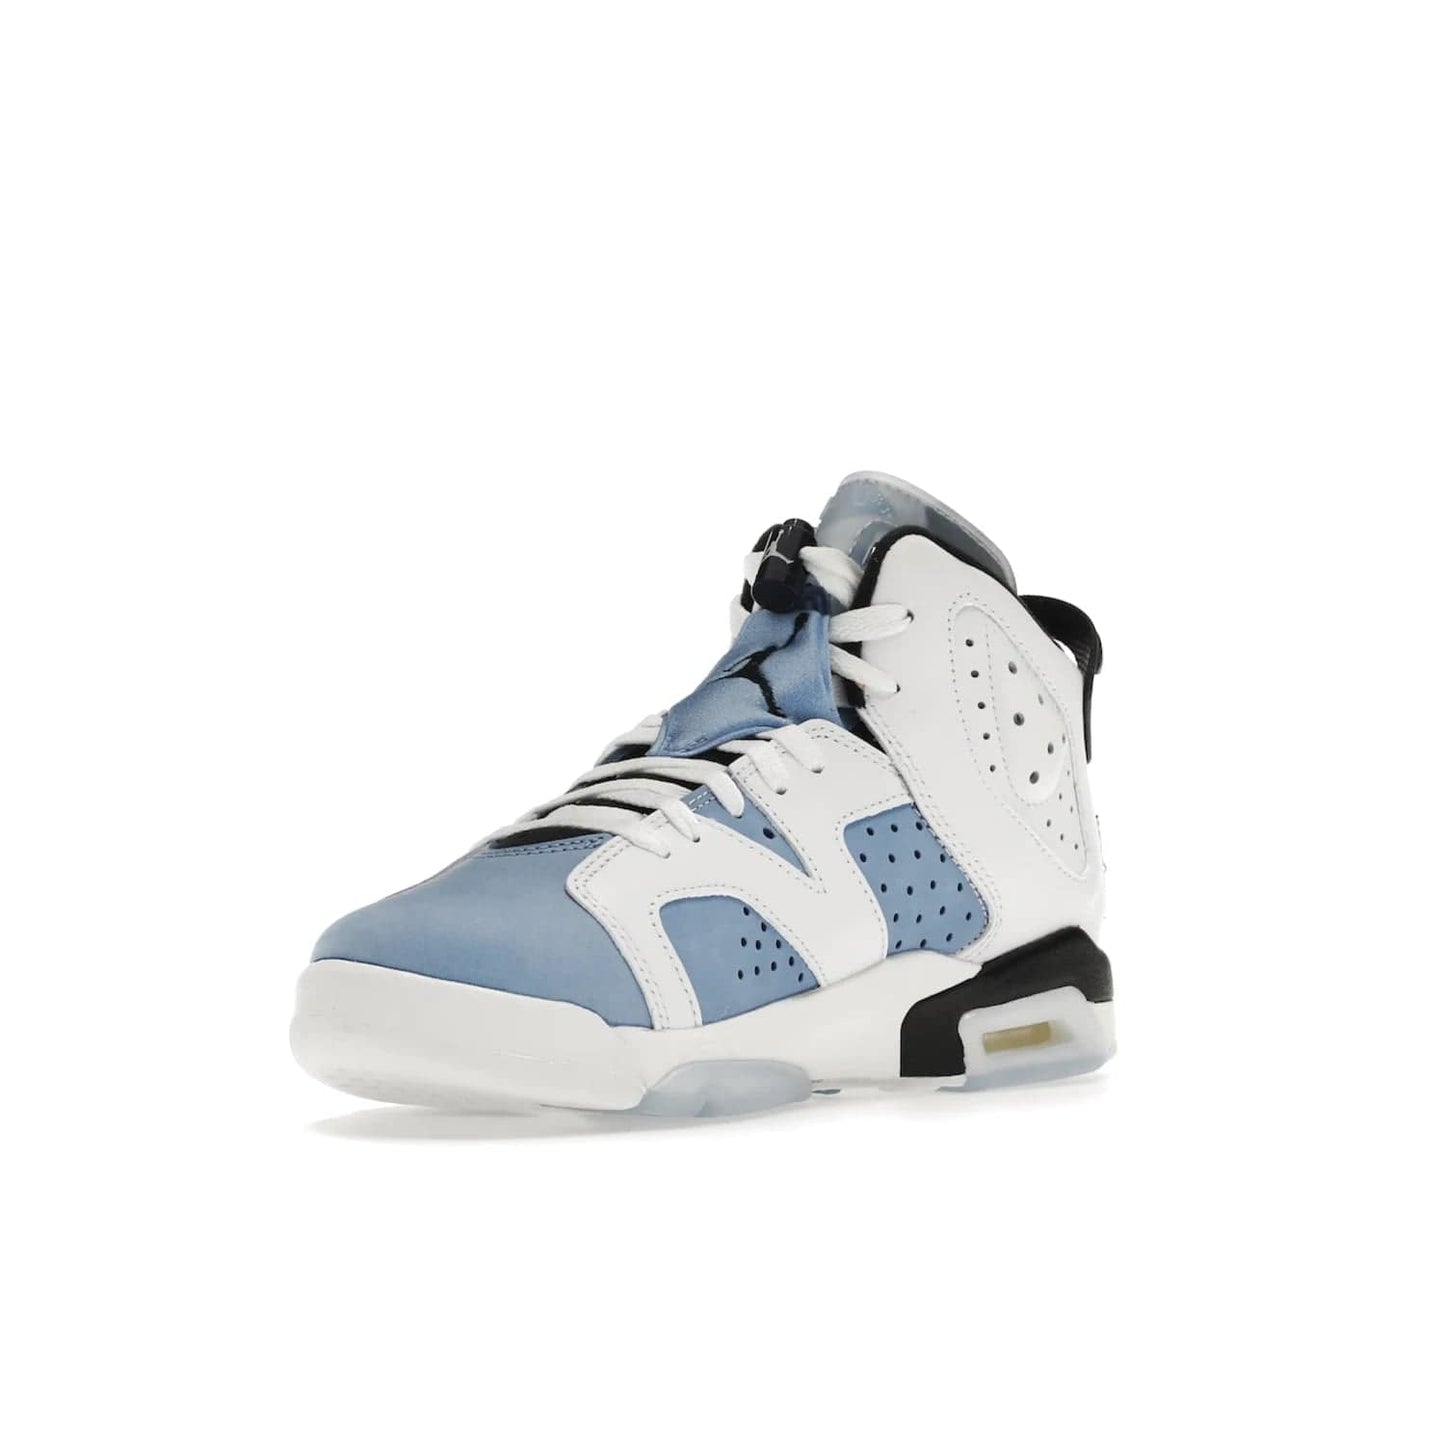 Jordan 6 Retro UNC White (GS) - Image 14 - Only at www.BallersClubKickz.com - Air Jordan 6 Retro UNC White GS: Michael Jordan alma mater, UNC Tar Heels, featuring colorway, nubuck, leather, Jumpman branding and a visible Air unit. Translucent blue/white outsole, perfect for completing sneaker rotation.